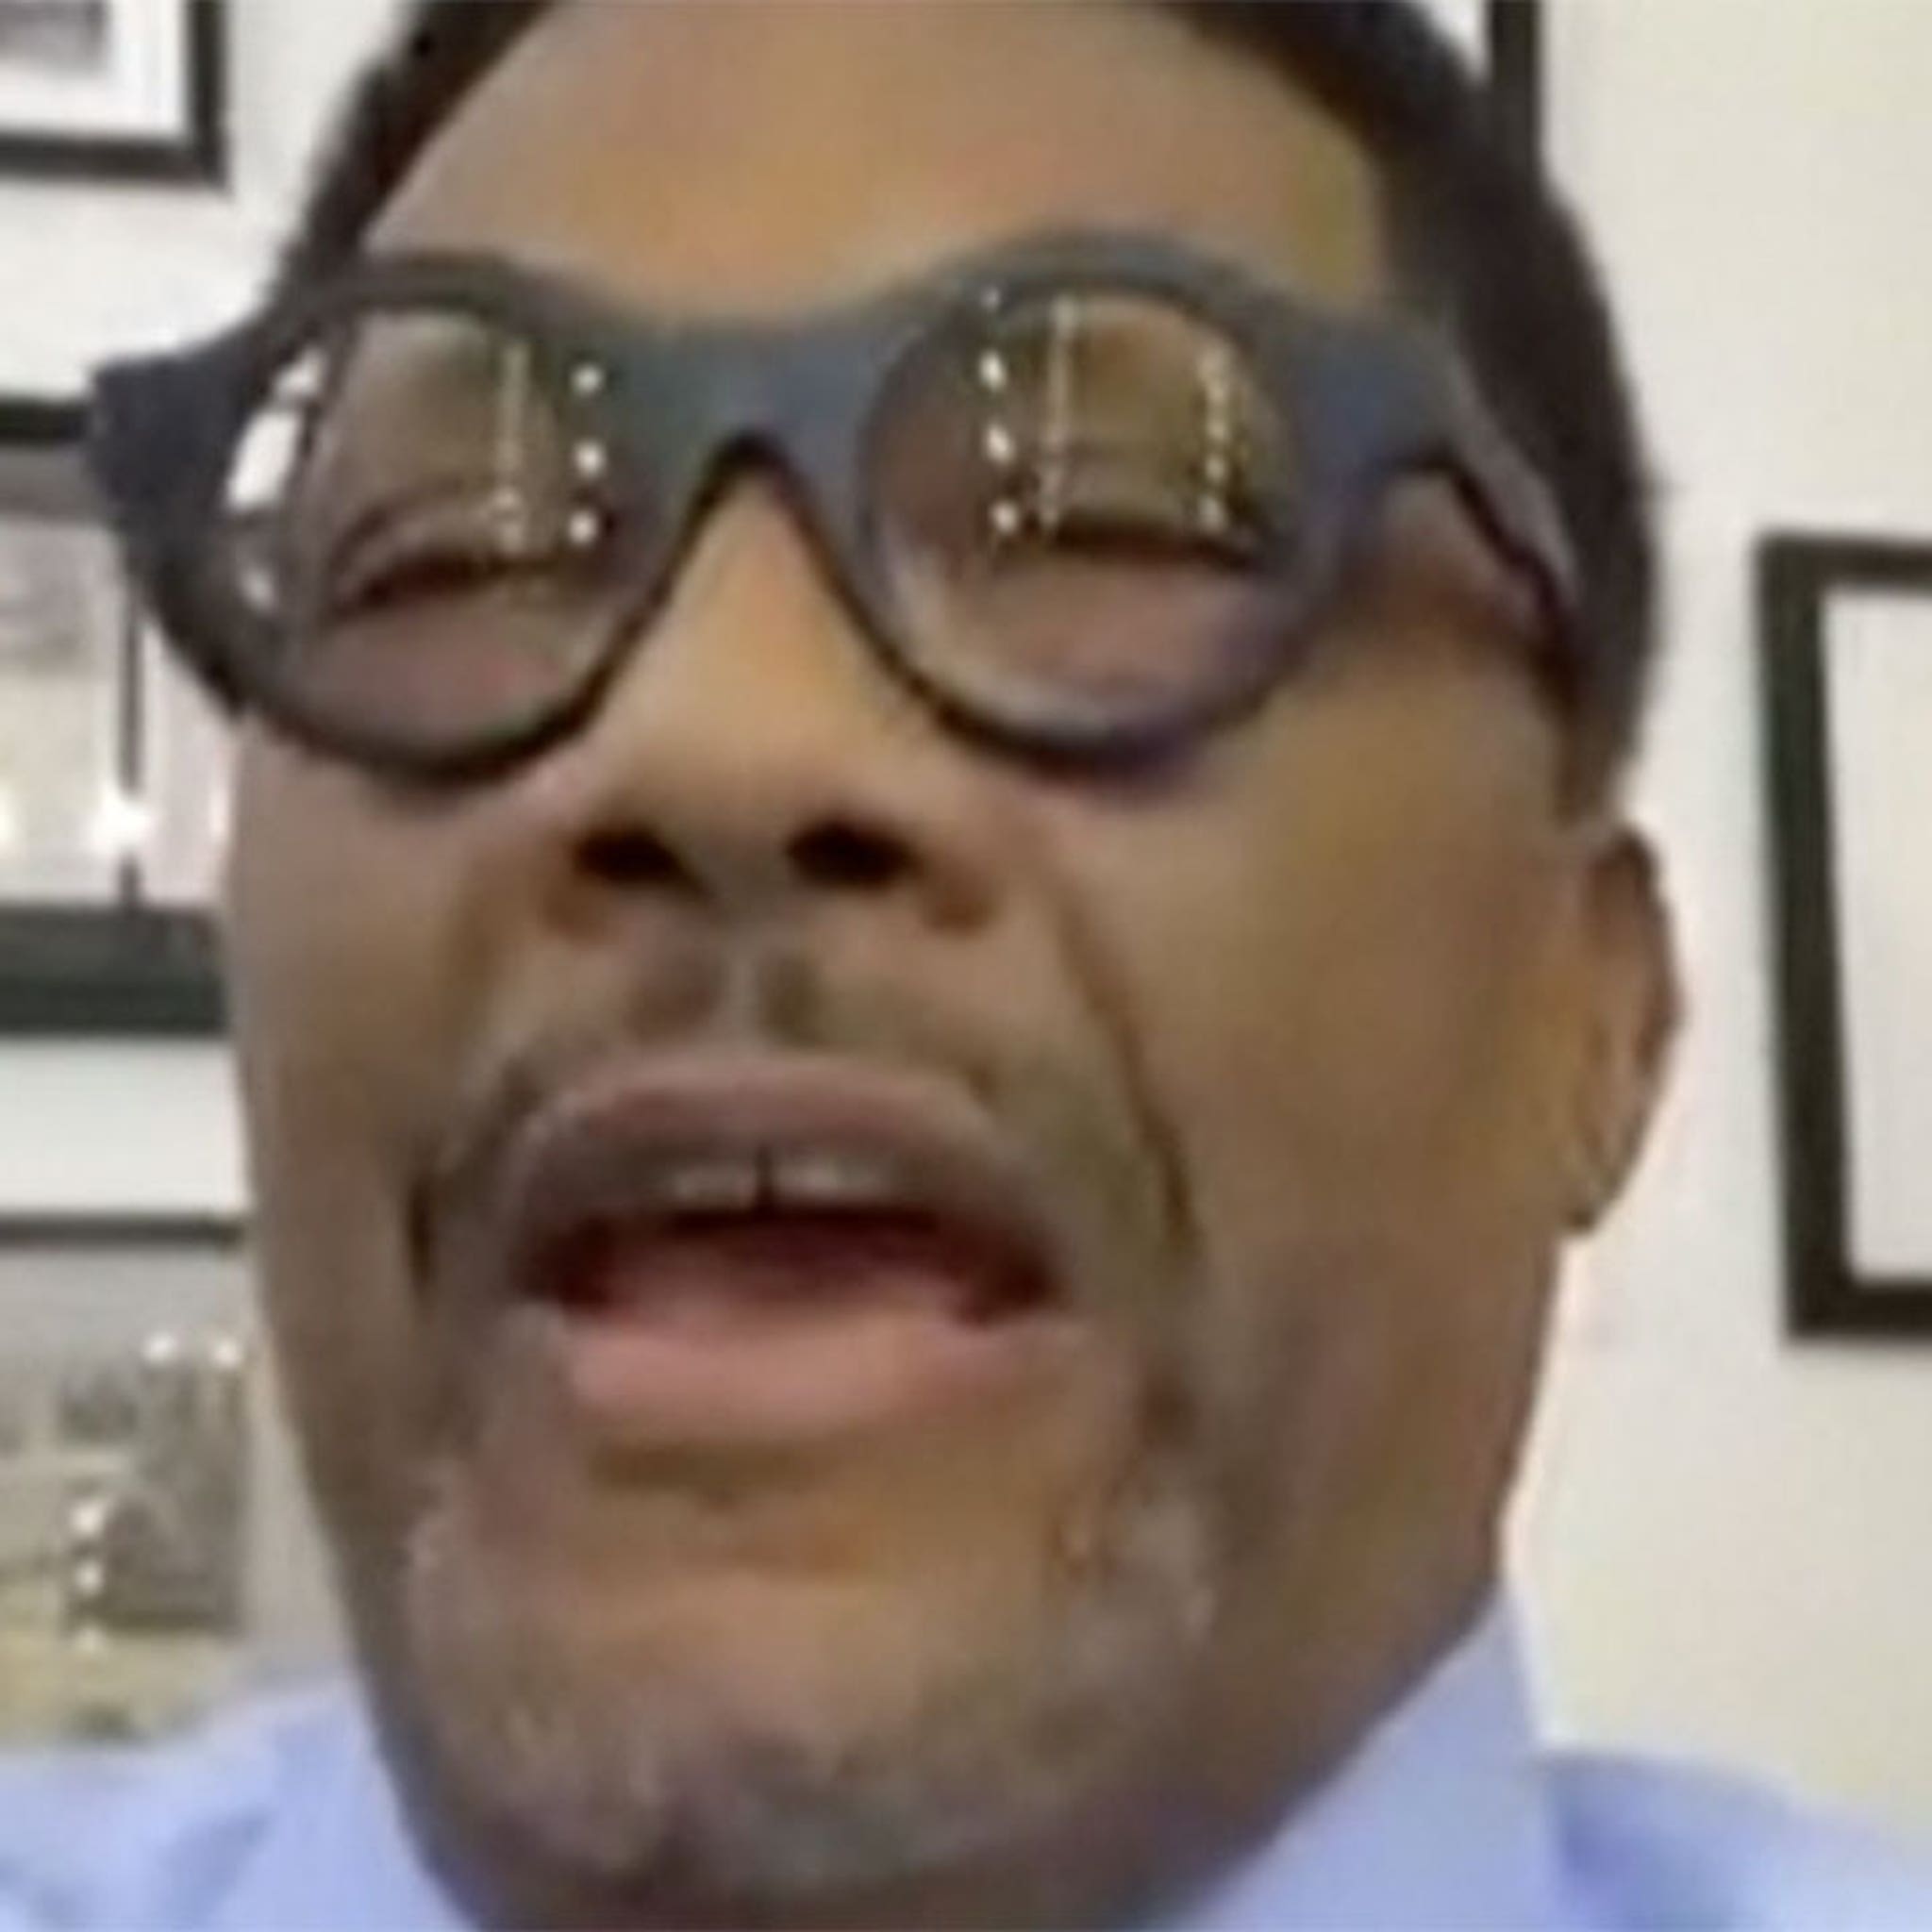 Judge Mathis Video of Alleged Spit 